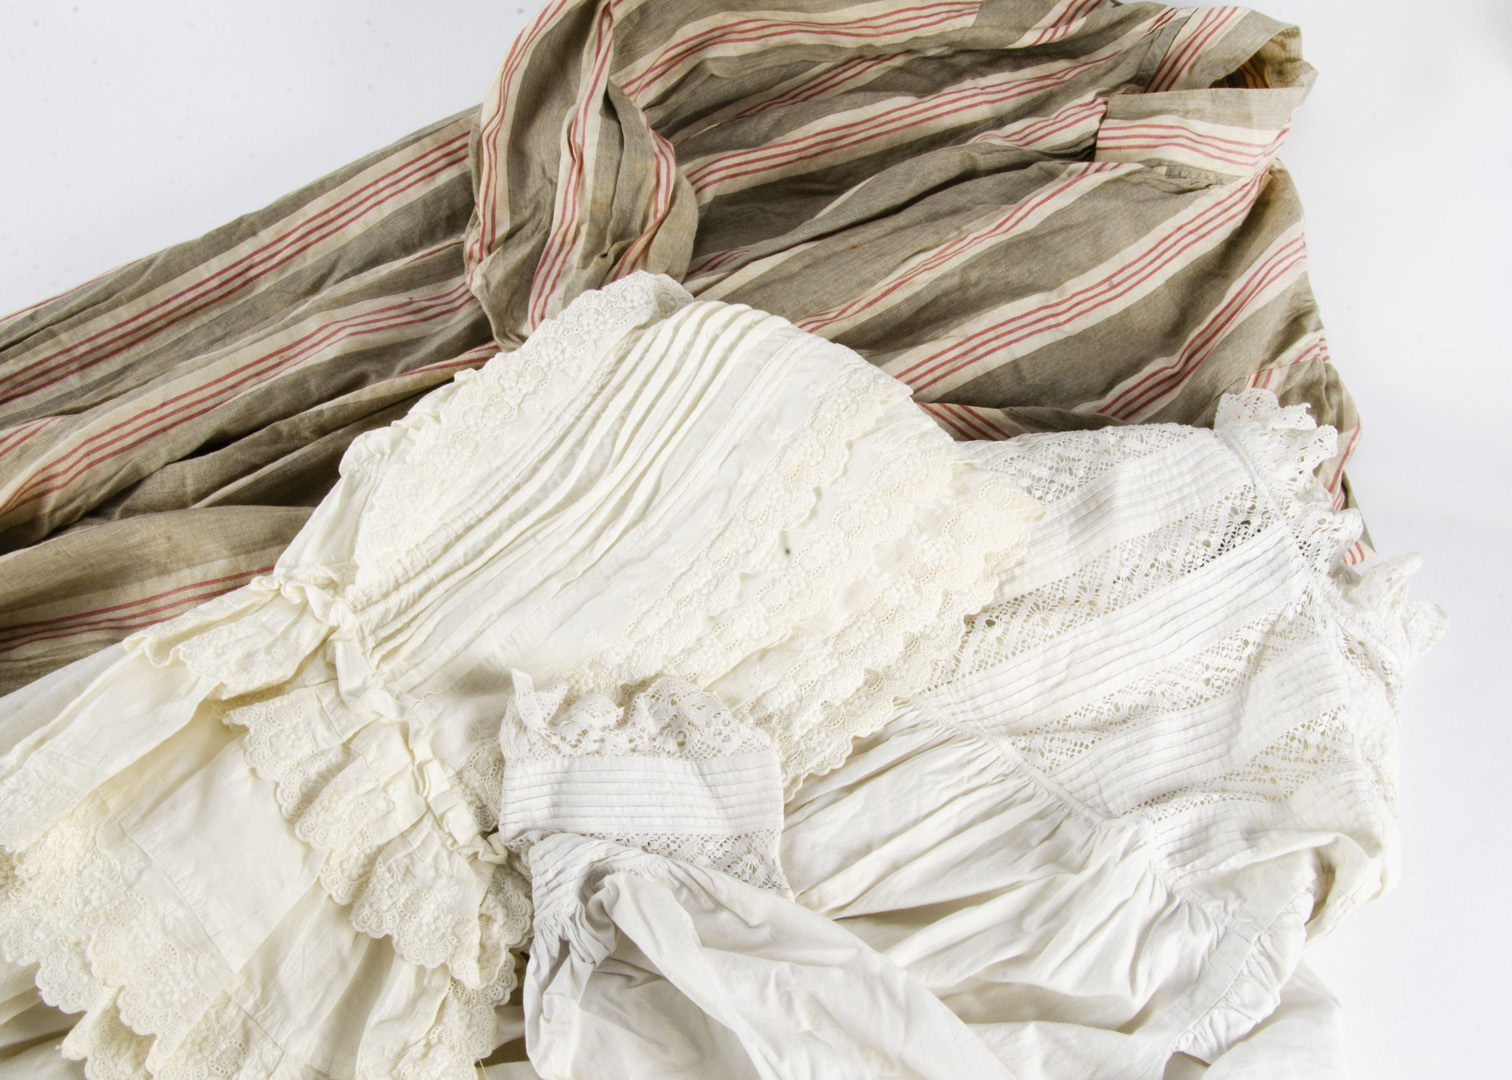 A collection of costume, including white cotton nightgowns, trimmed with pin tucking and lace, circa